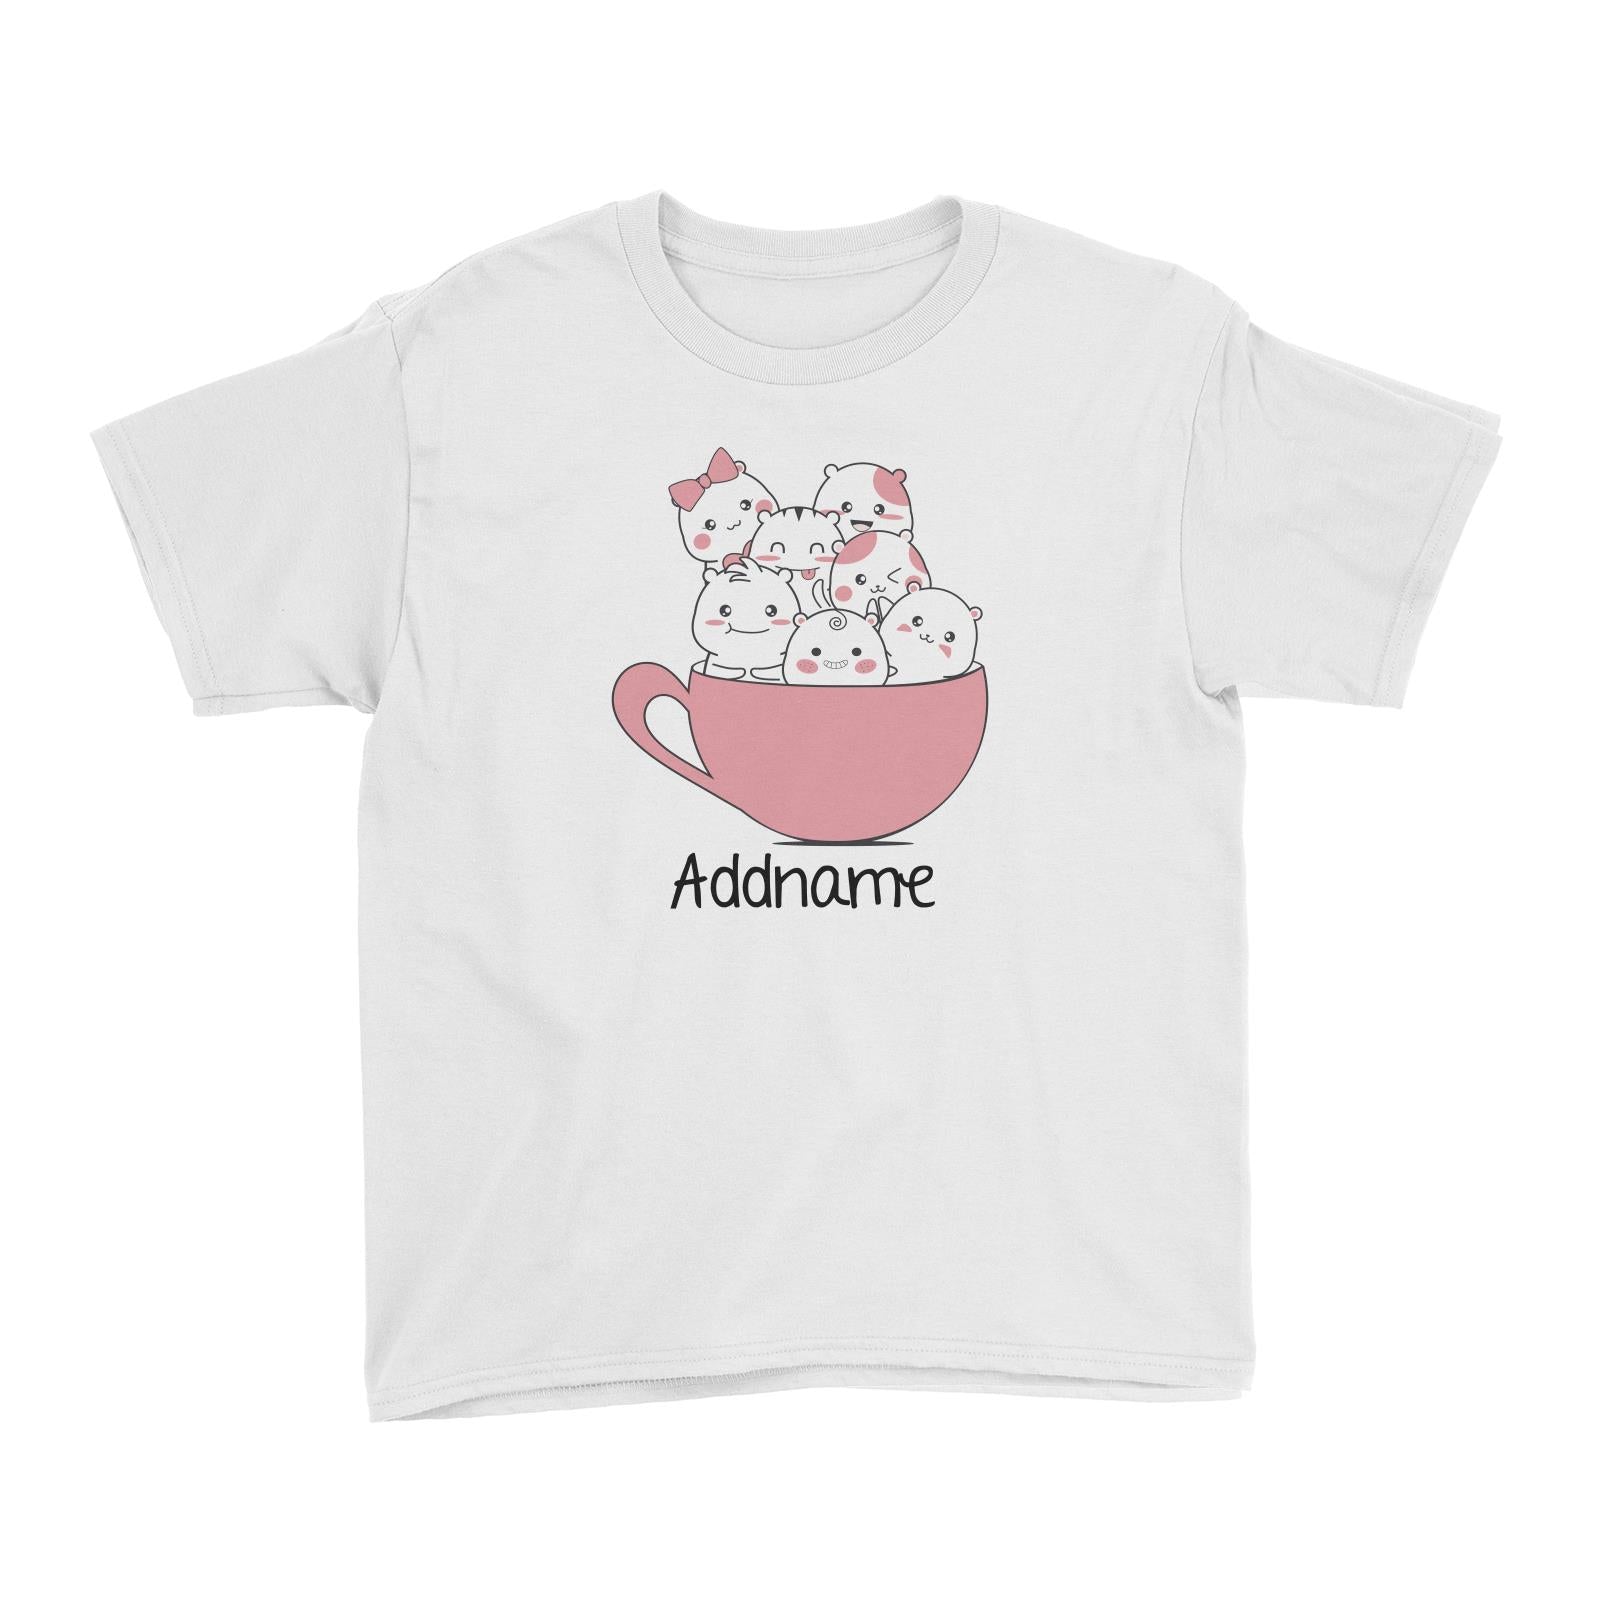 Cute Animals And Friends Series Cute Hamster Group Coffee Cup Addname Kid's T-Shirt